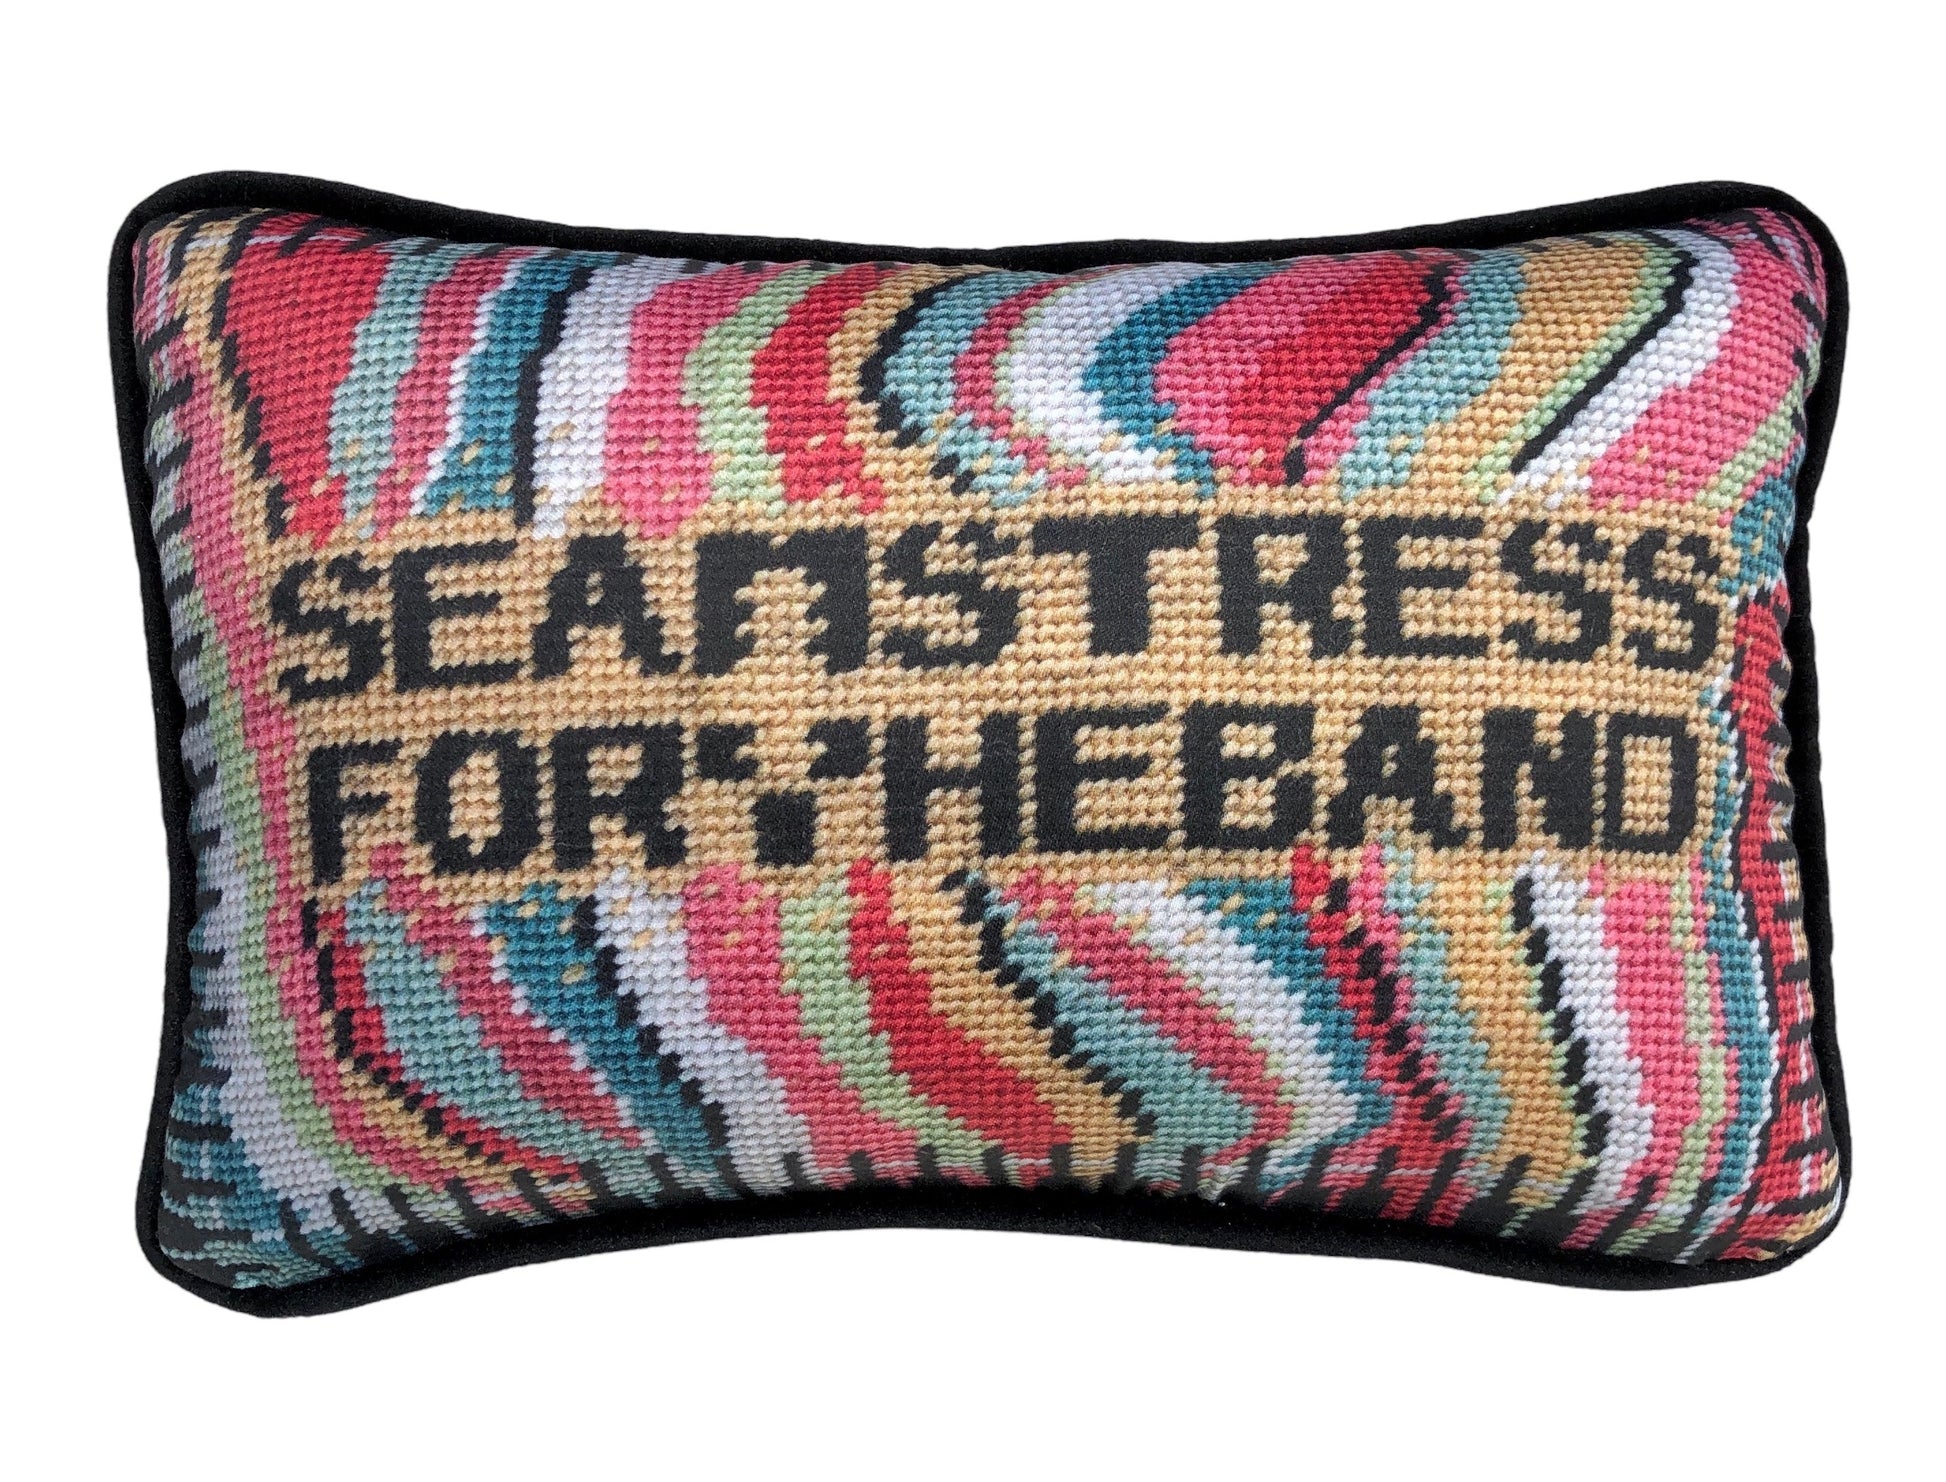 SEAMSTRESS FOR THE BAND black letters inside tan box, surrounded by wavy bands of turquoise, pink, red, white, lime and a keyboard border